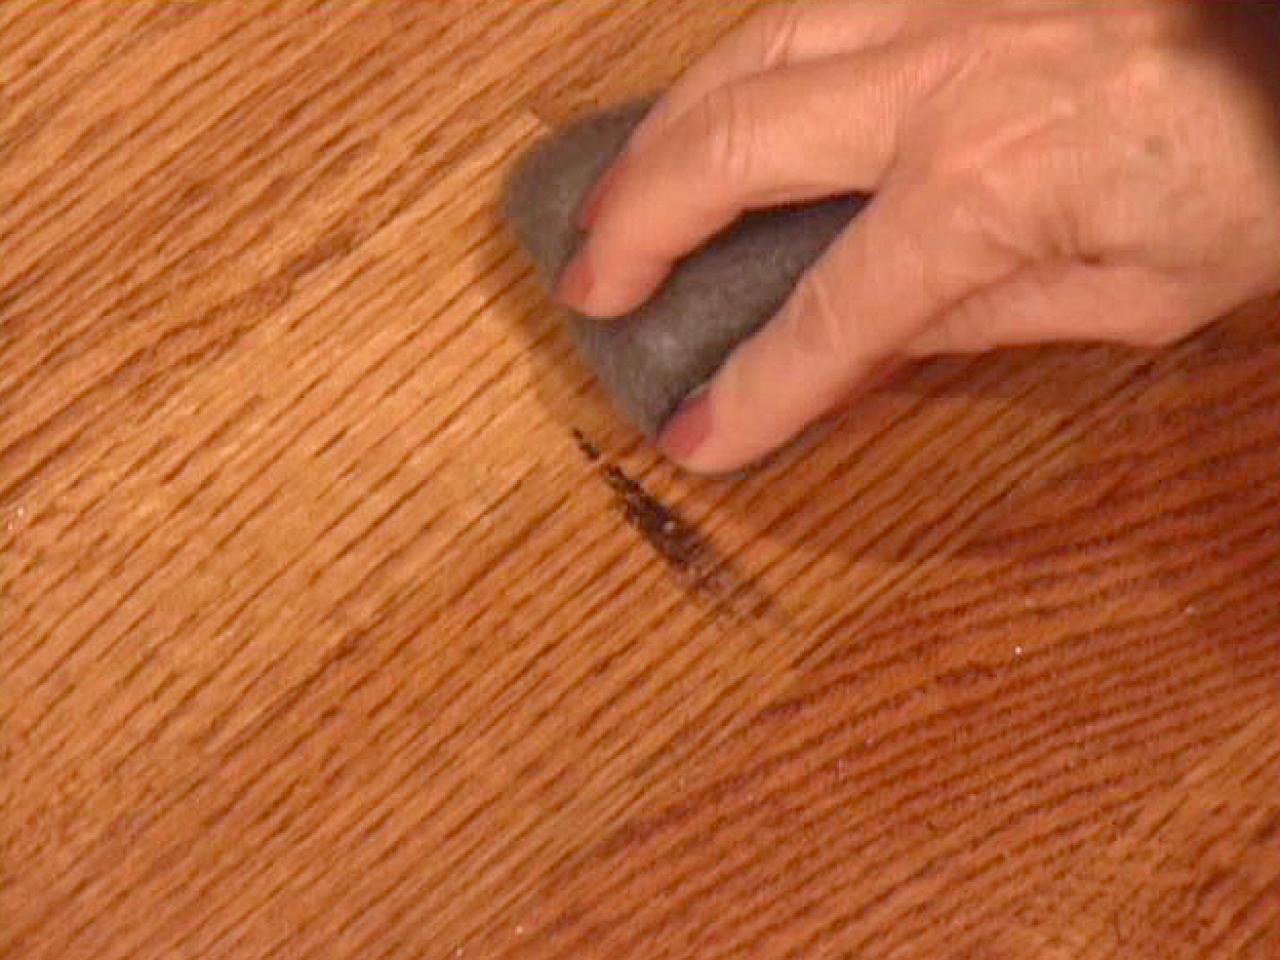 How To Touch Up Wood Floors Tos Diy, How To Remove Scuff Marks From Laminate Flooring